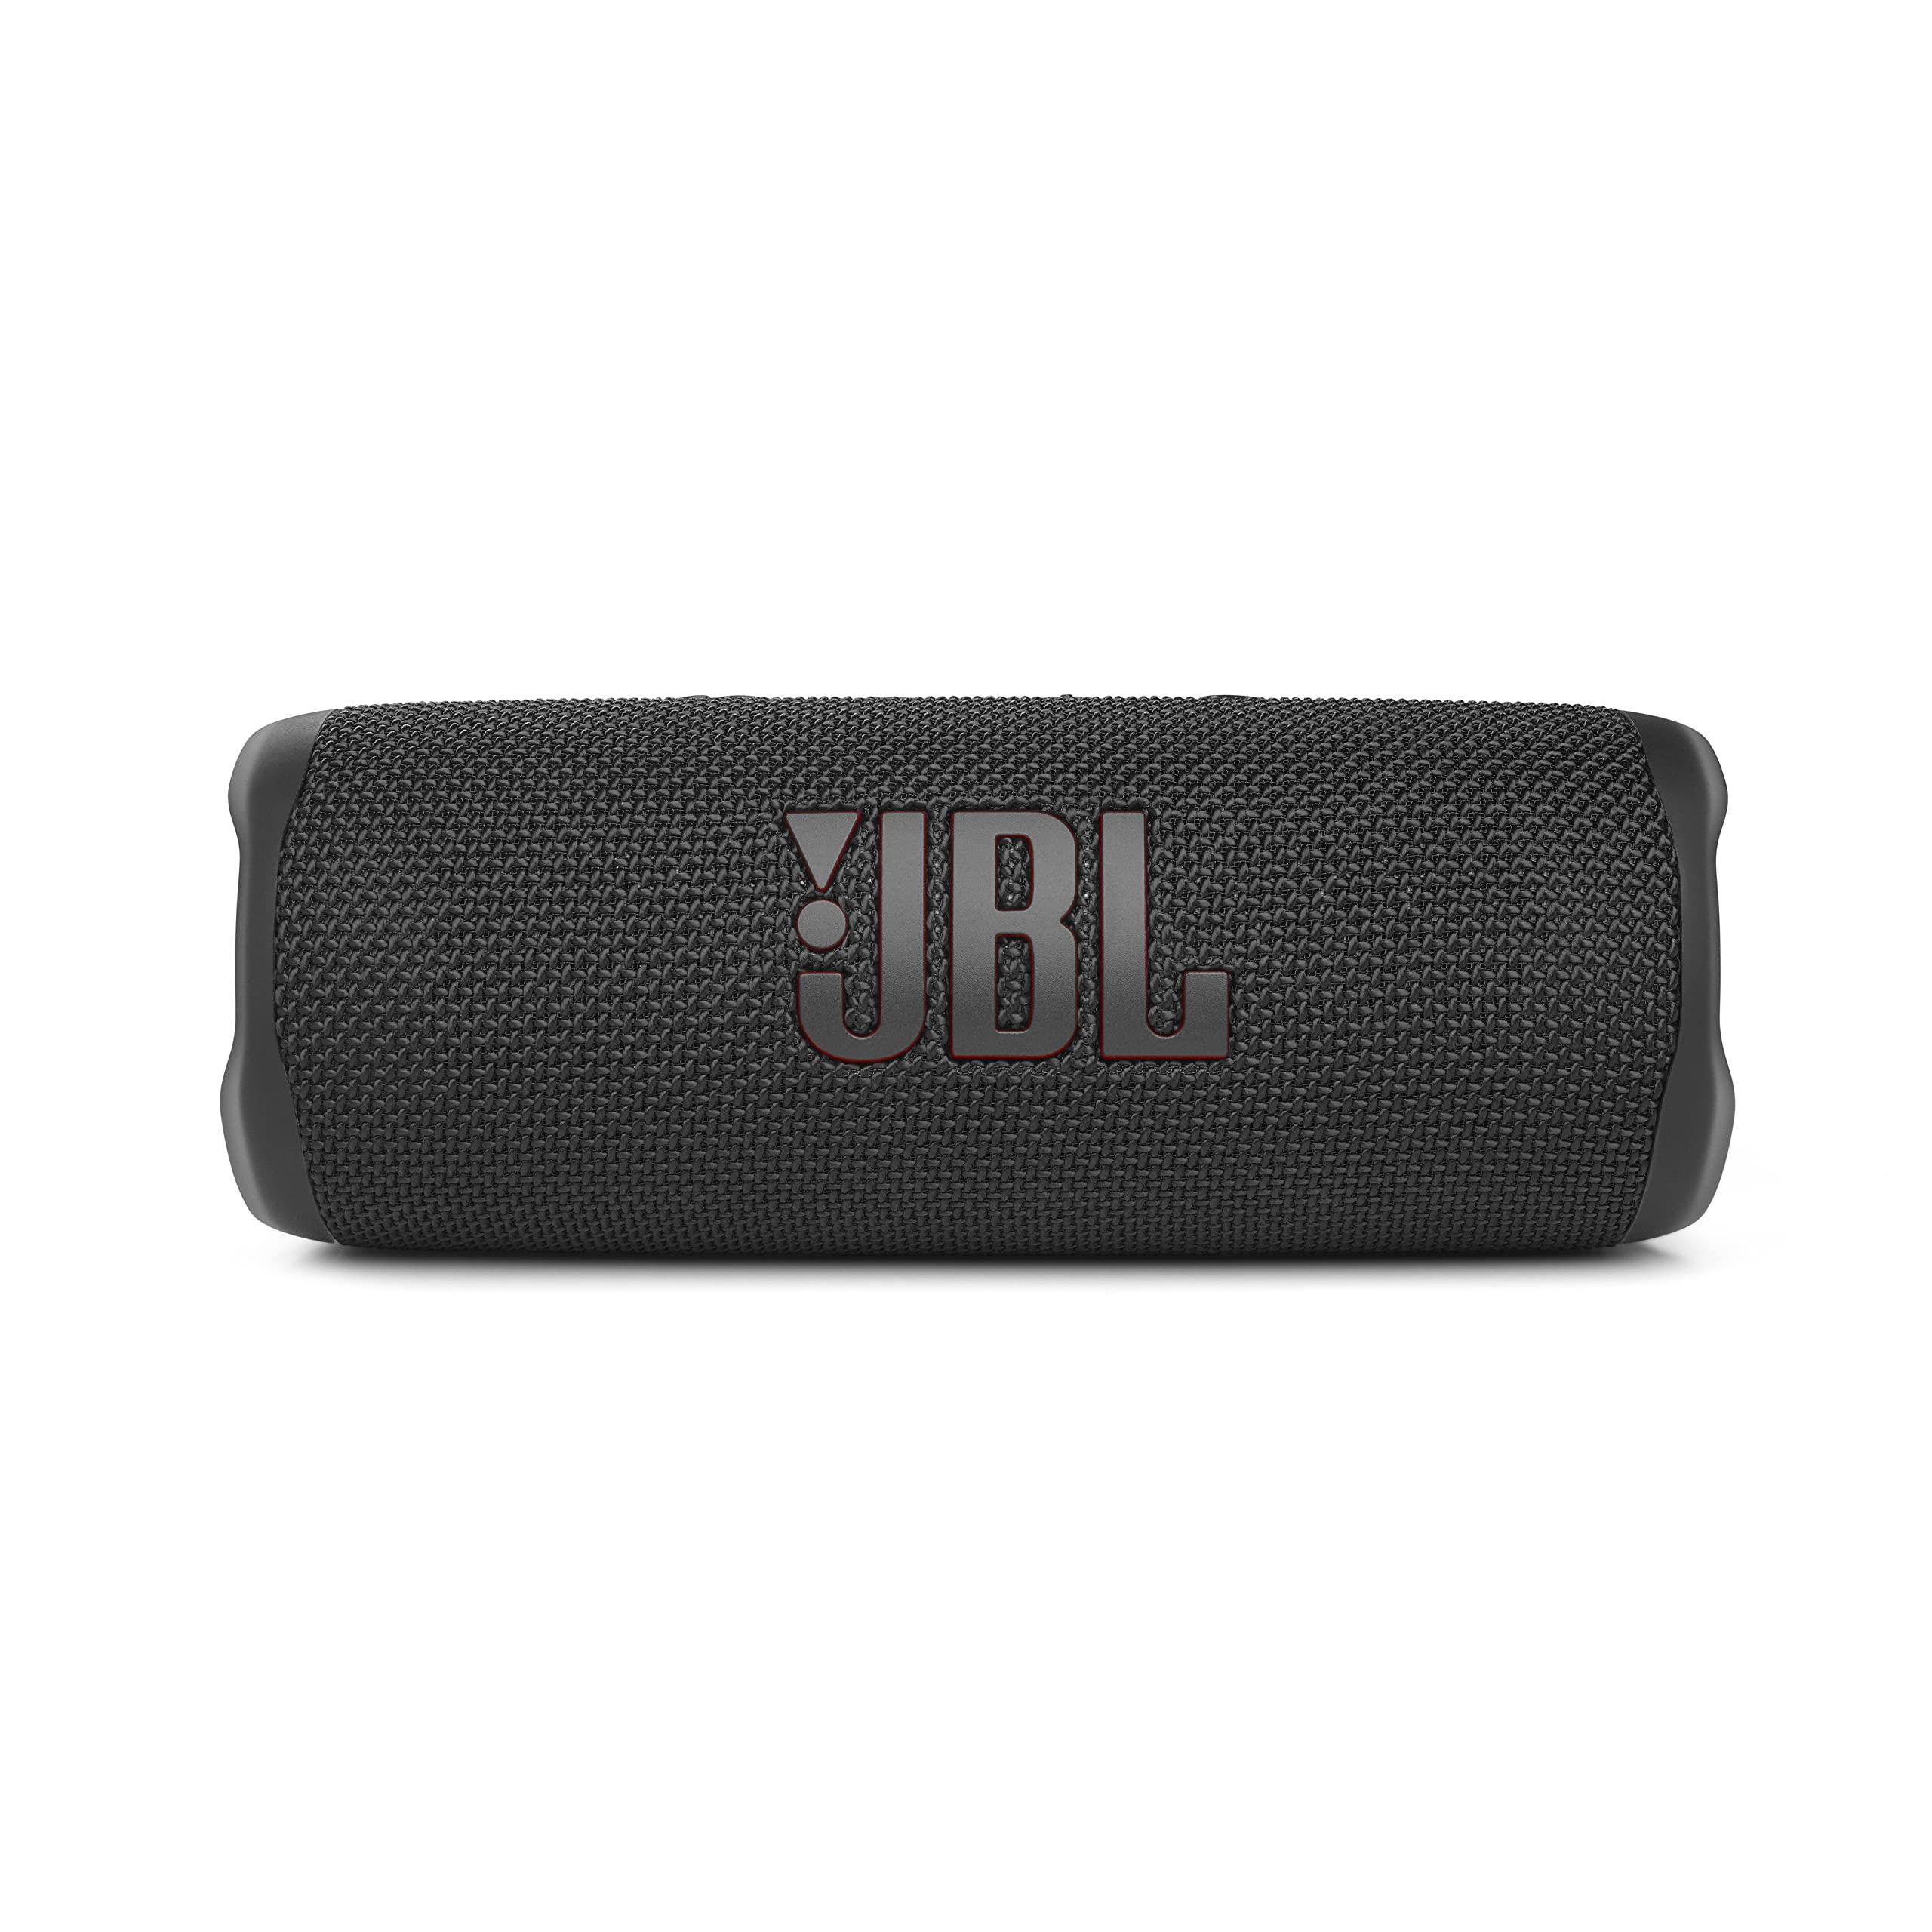 JBL Flip 6 - Portable Bluetooth Speaker, powerful sound and deep bass, IPX7 waterproof, 12 hours of playtime,  PartyBoost for multiple speaker pairing for home, outdoor and travel (Black)